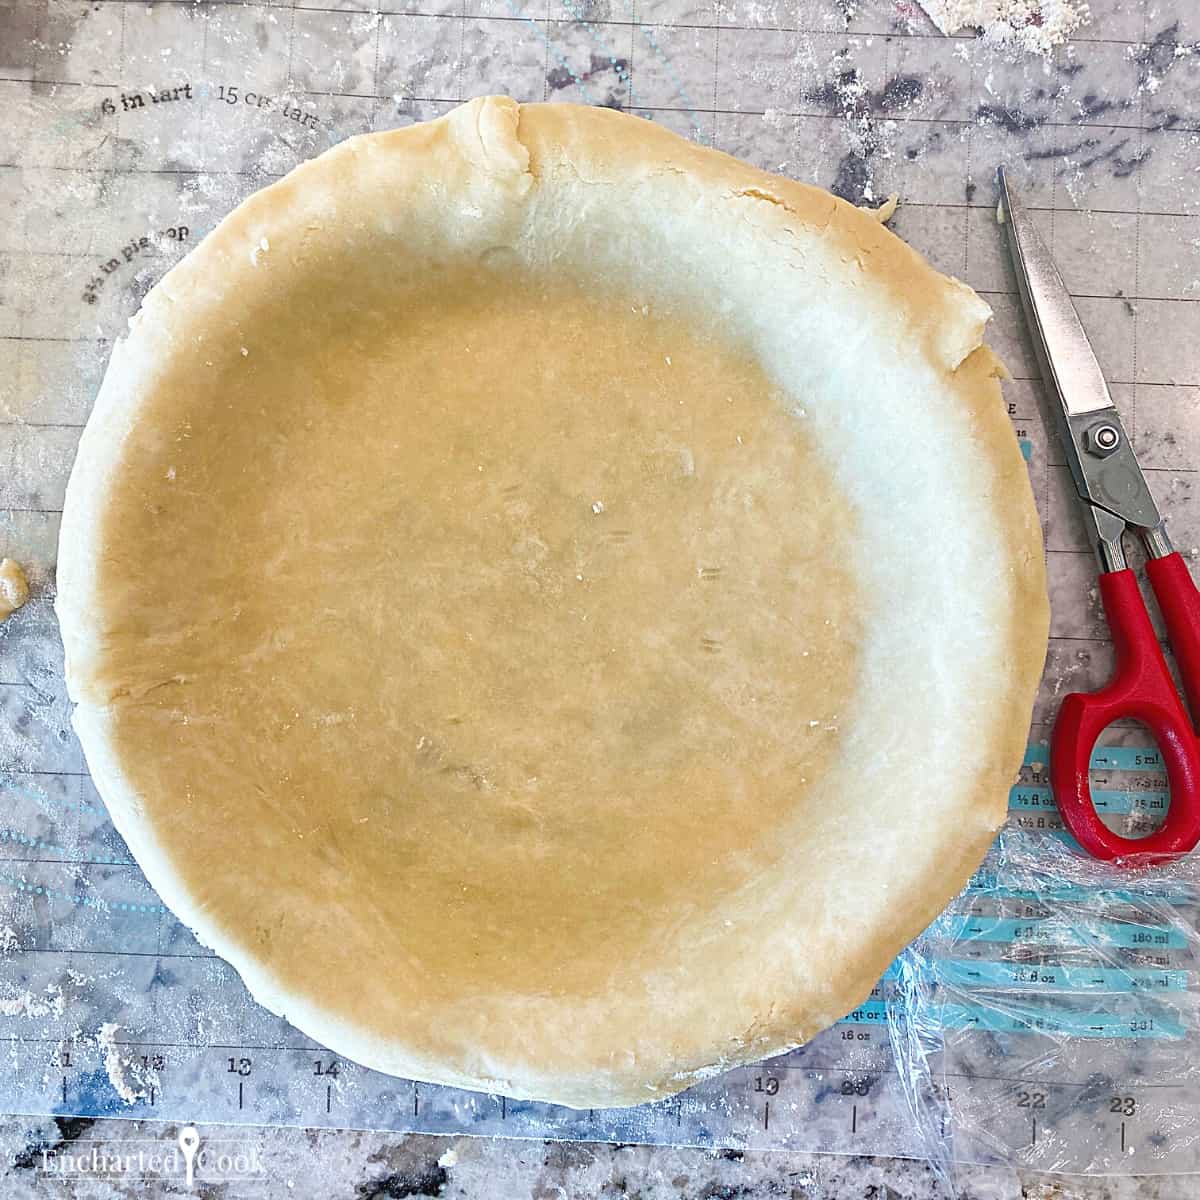 Trimming the pie crust in the pan with scissors.